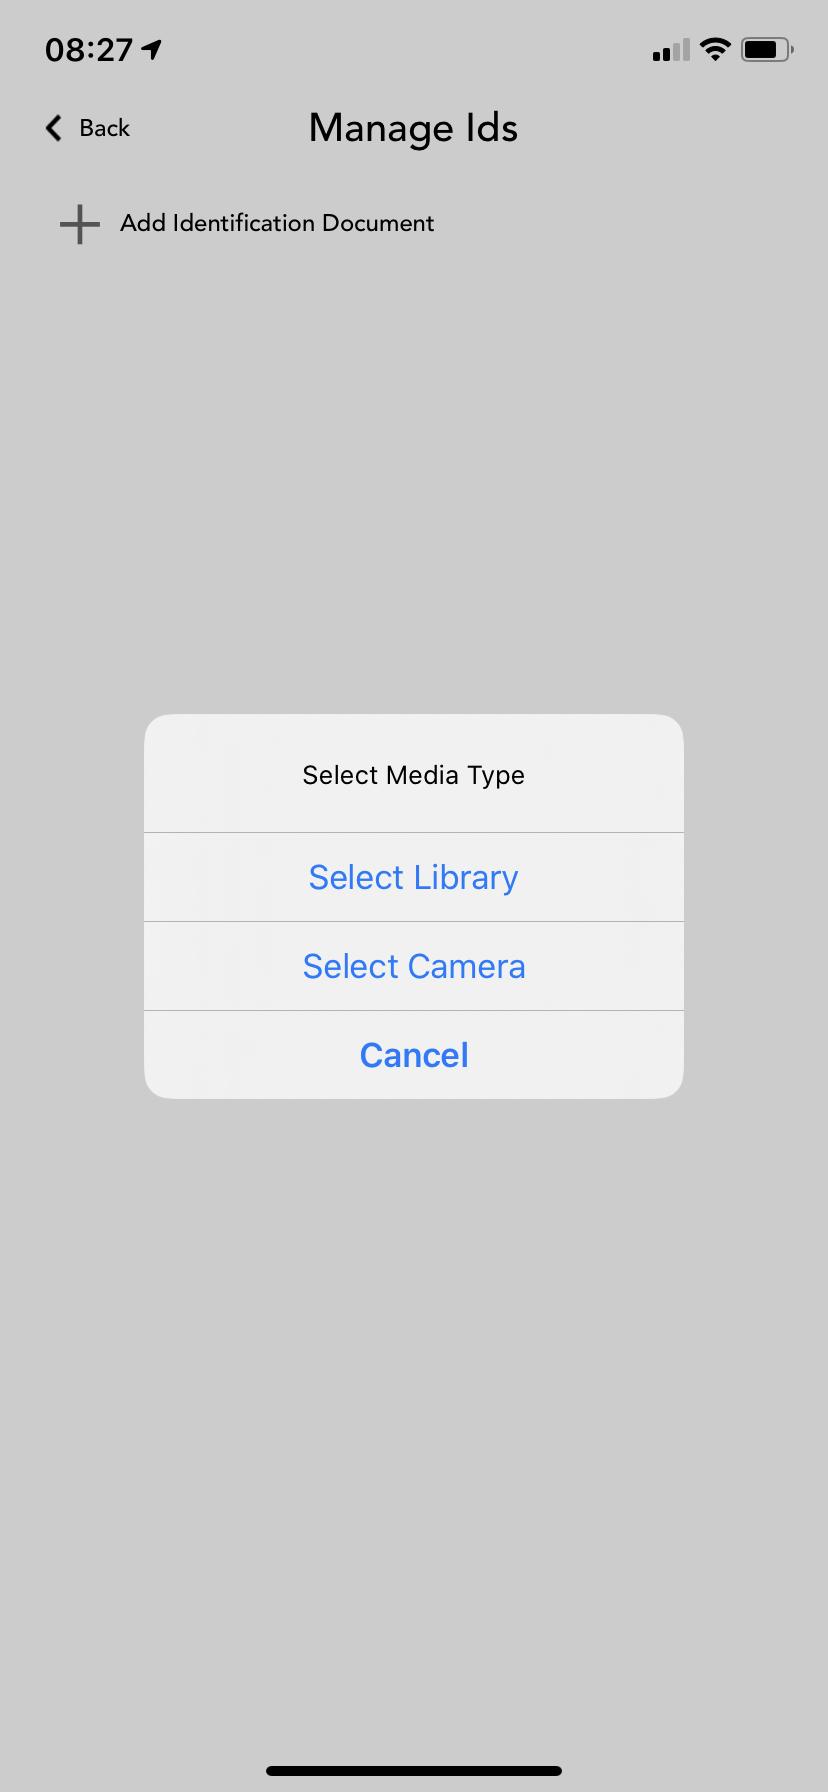 Select Library or Camera